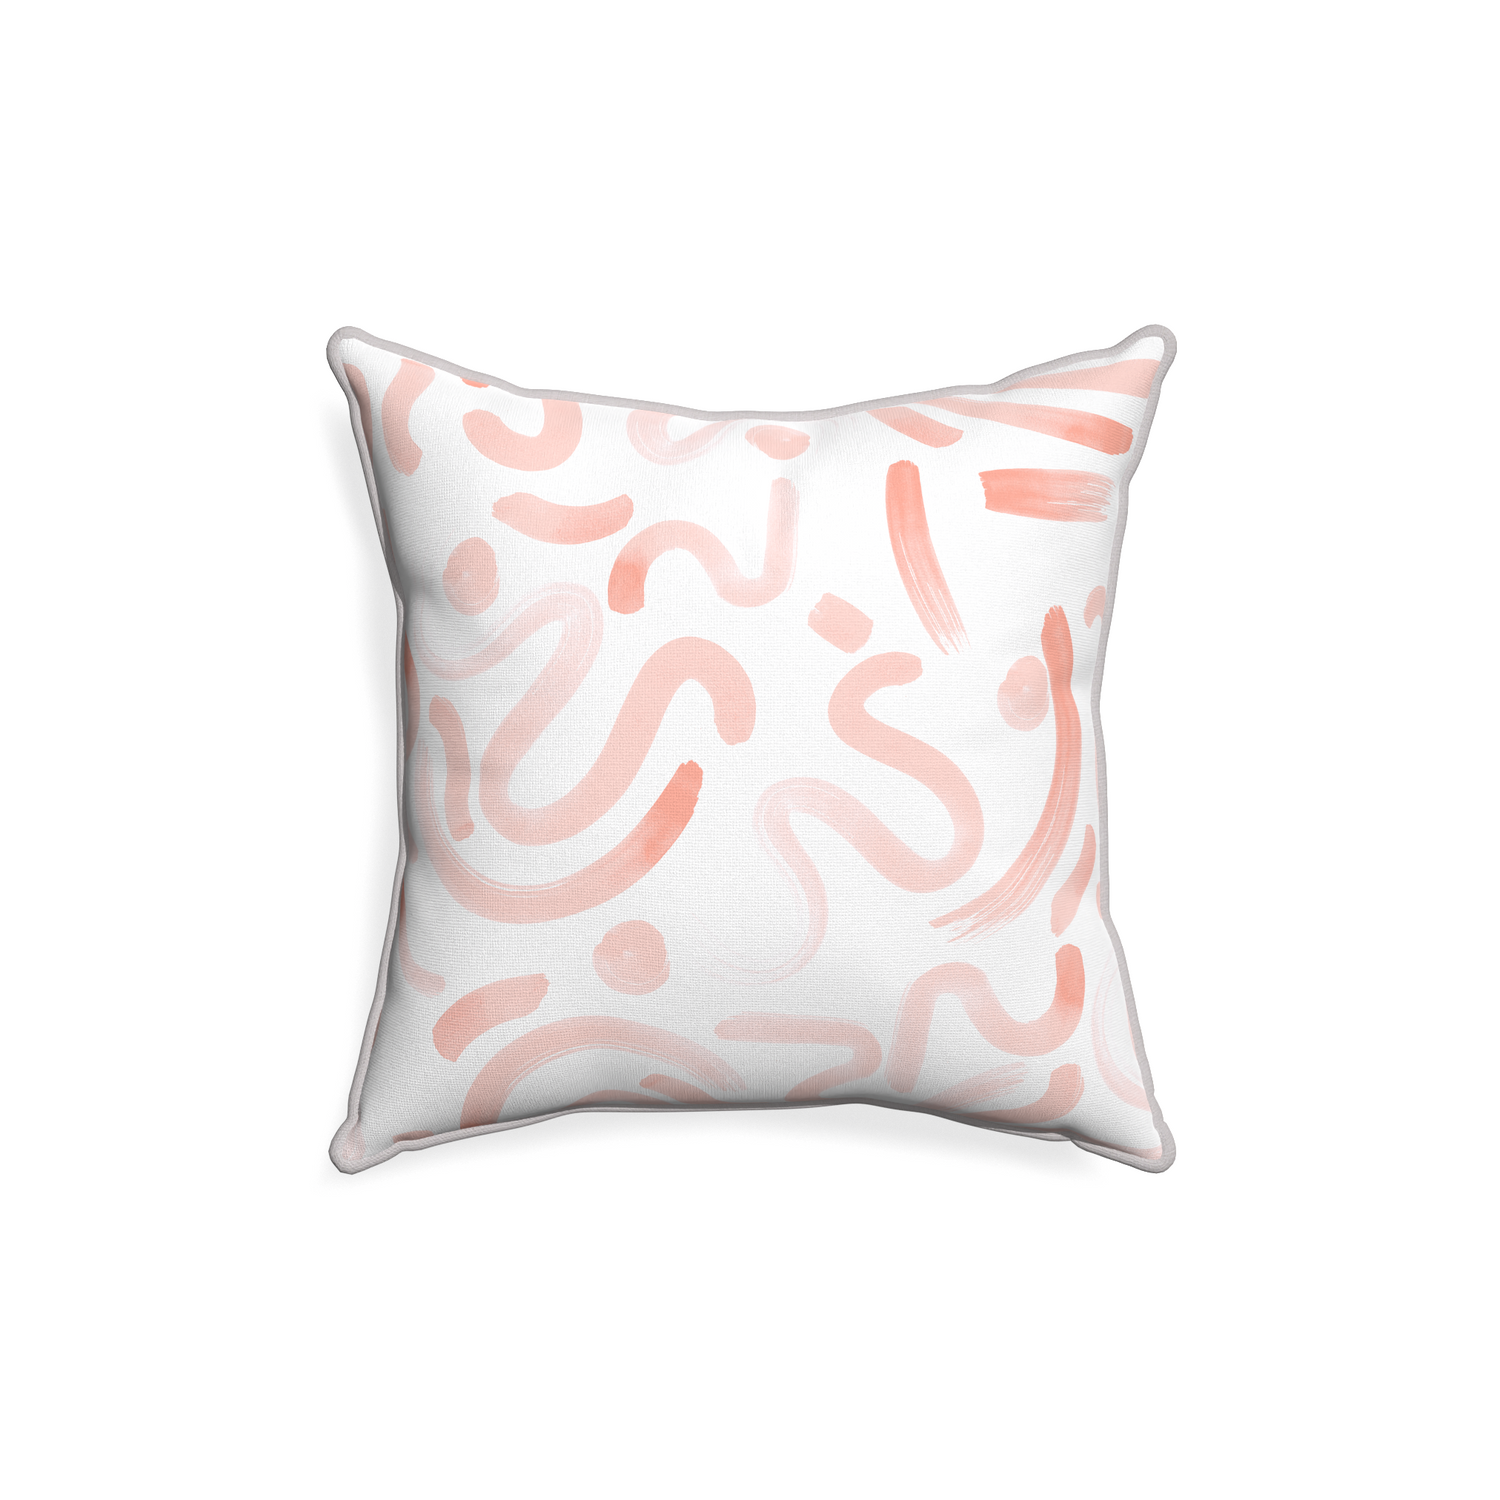 18-square hockney pink custom pillow with pebble piping on white background